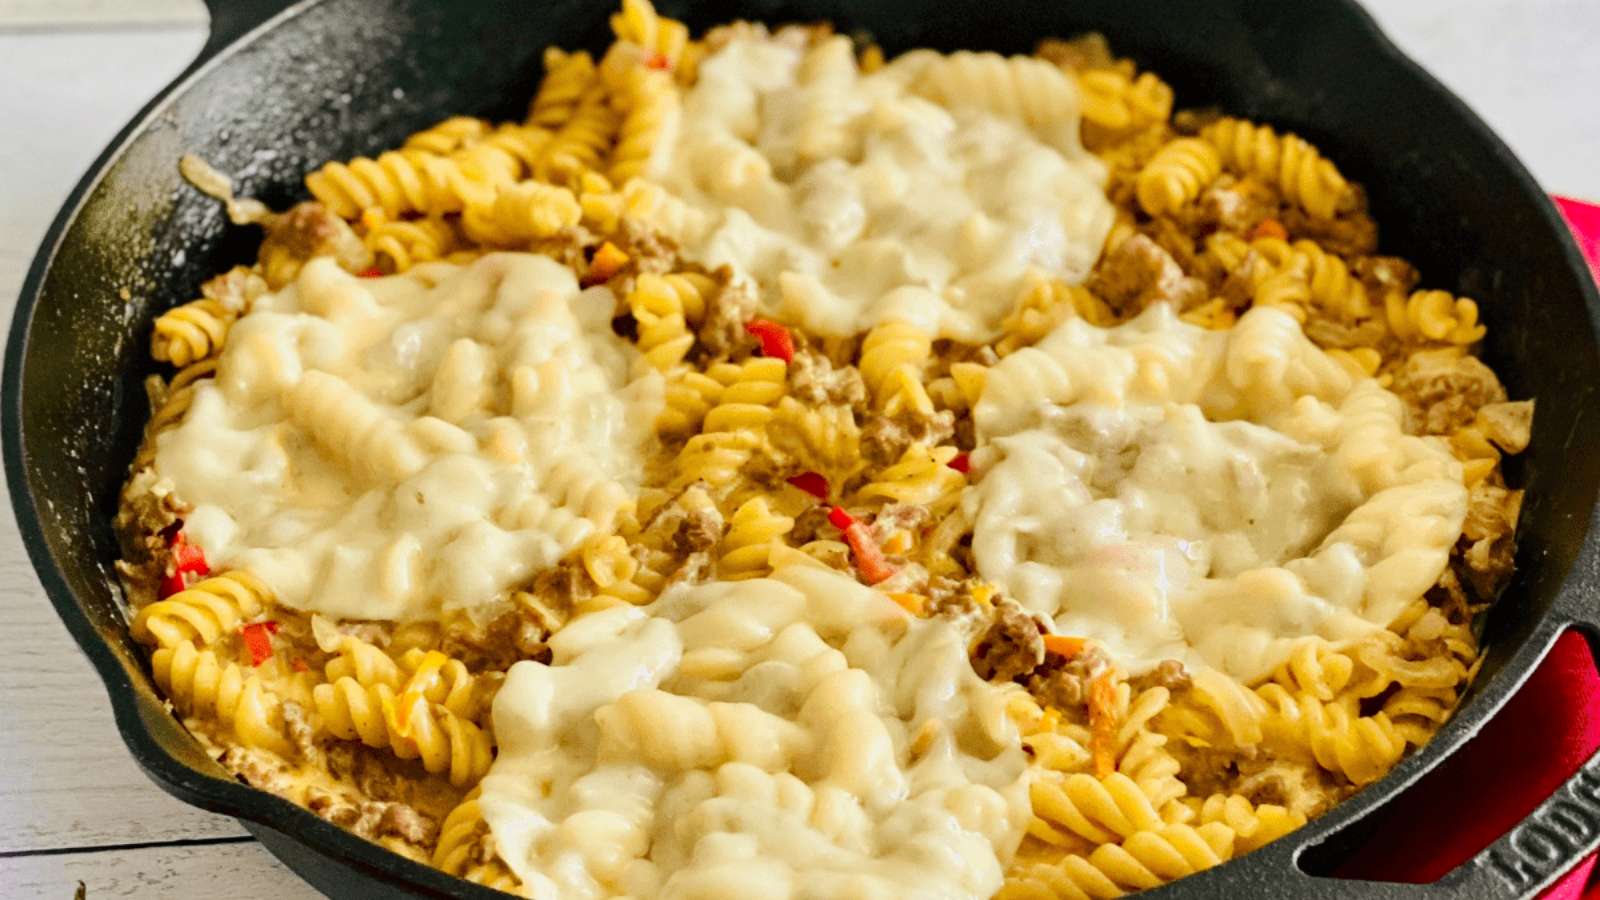 A skillet filled with pasta and cheese.